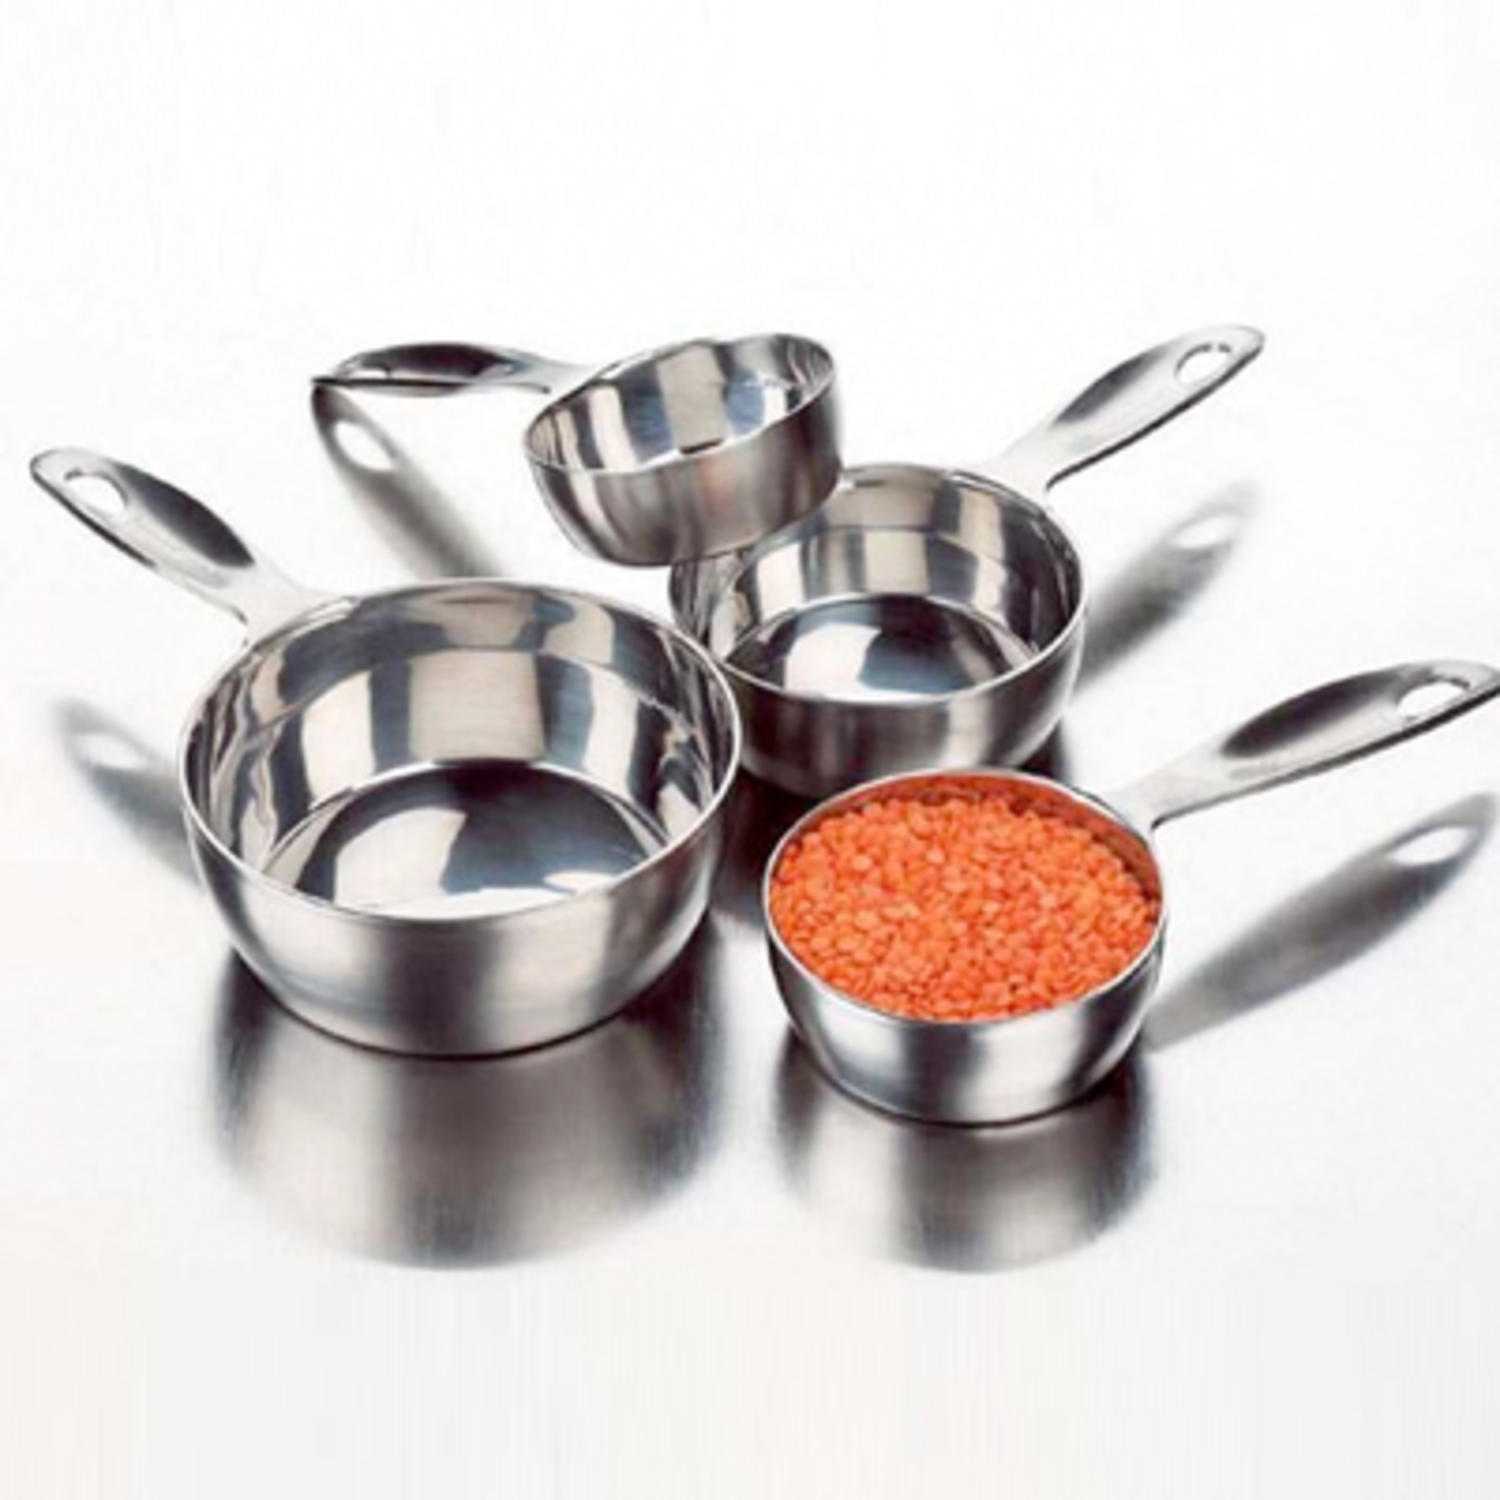 MEASURING CUP SET - STAINLESS STEEL-AMCO-8440